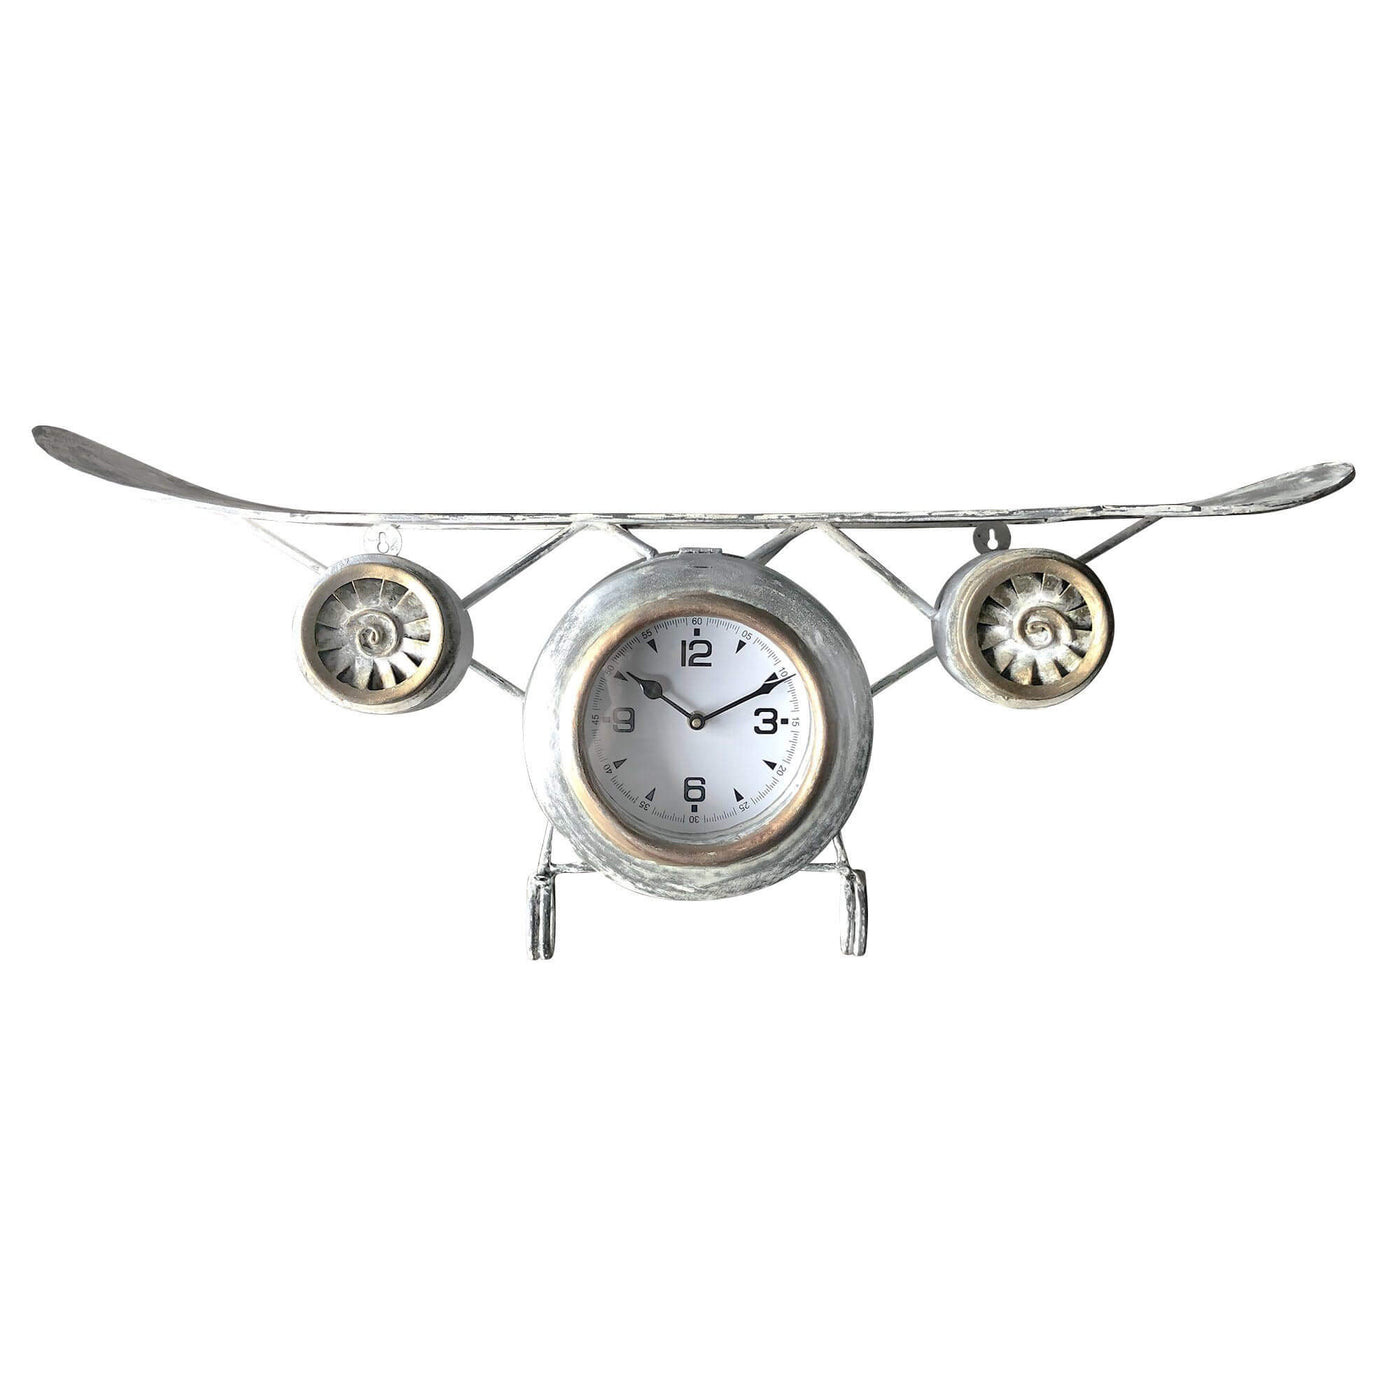 Handcrafted Airplane Wall Clock - Distressed Gray - 31" Wingspan in partnership with Rustic Deco Incorporated